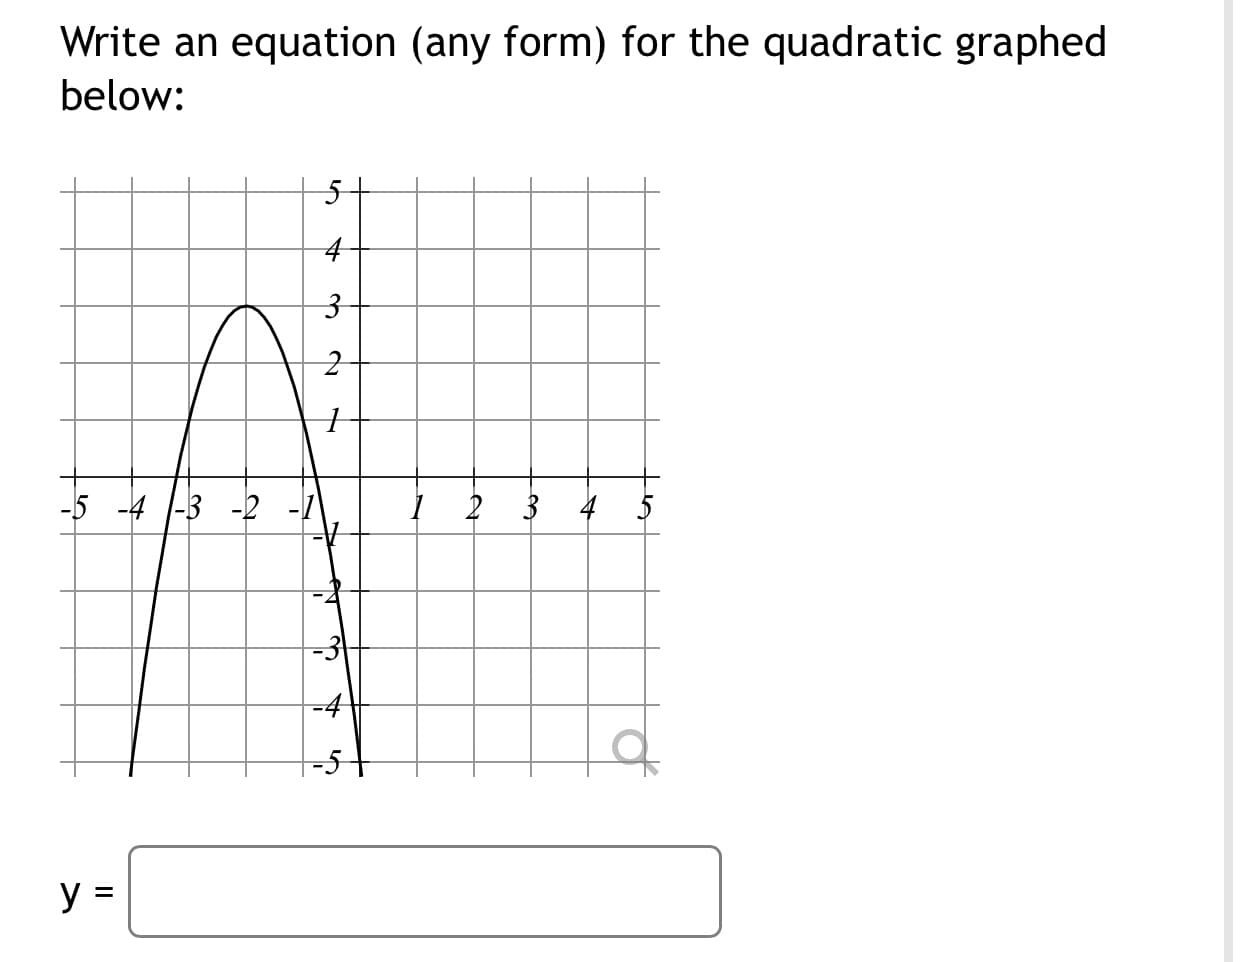 Write an equation (any form) for the quadratic graphed
below:
-5 -4 |-3 -2
I 2 3
-4
-5
3.
